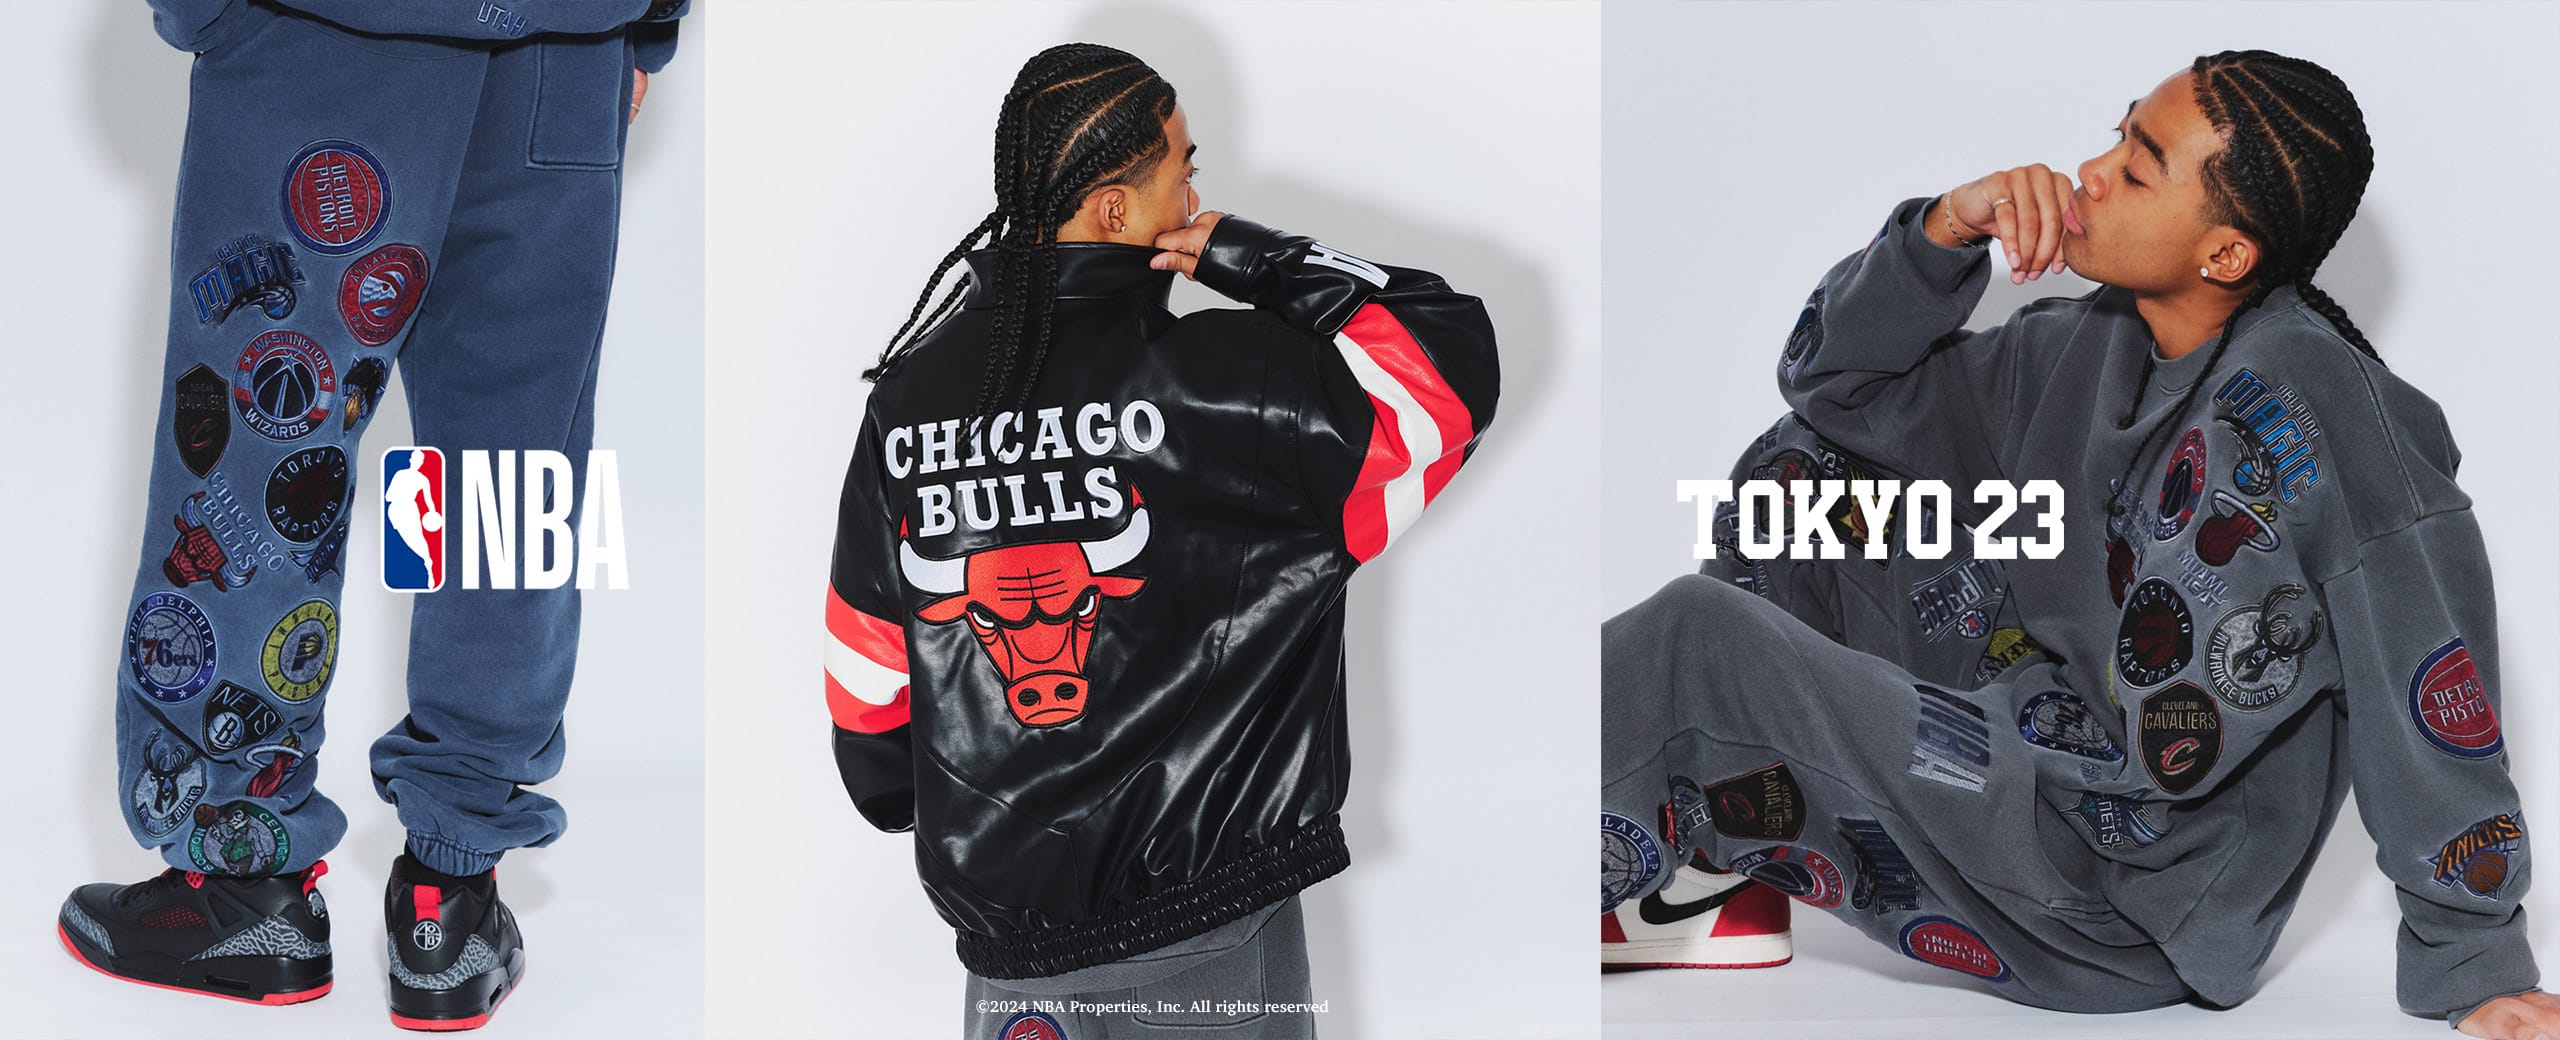 NBA CAPSULE COLLECTION